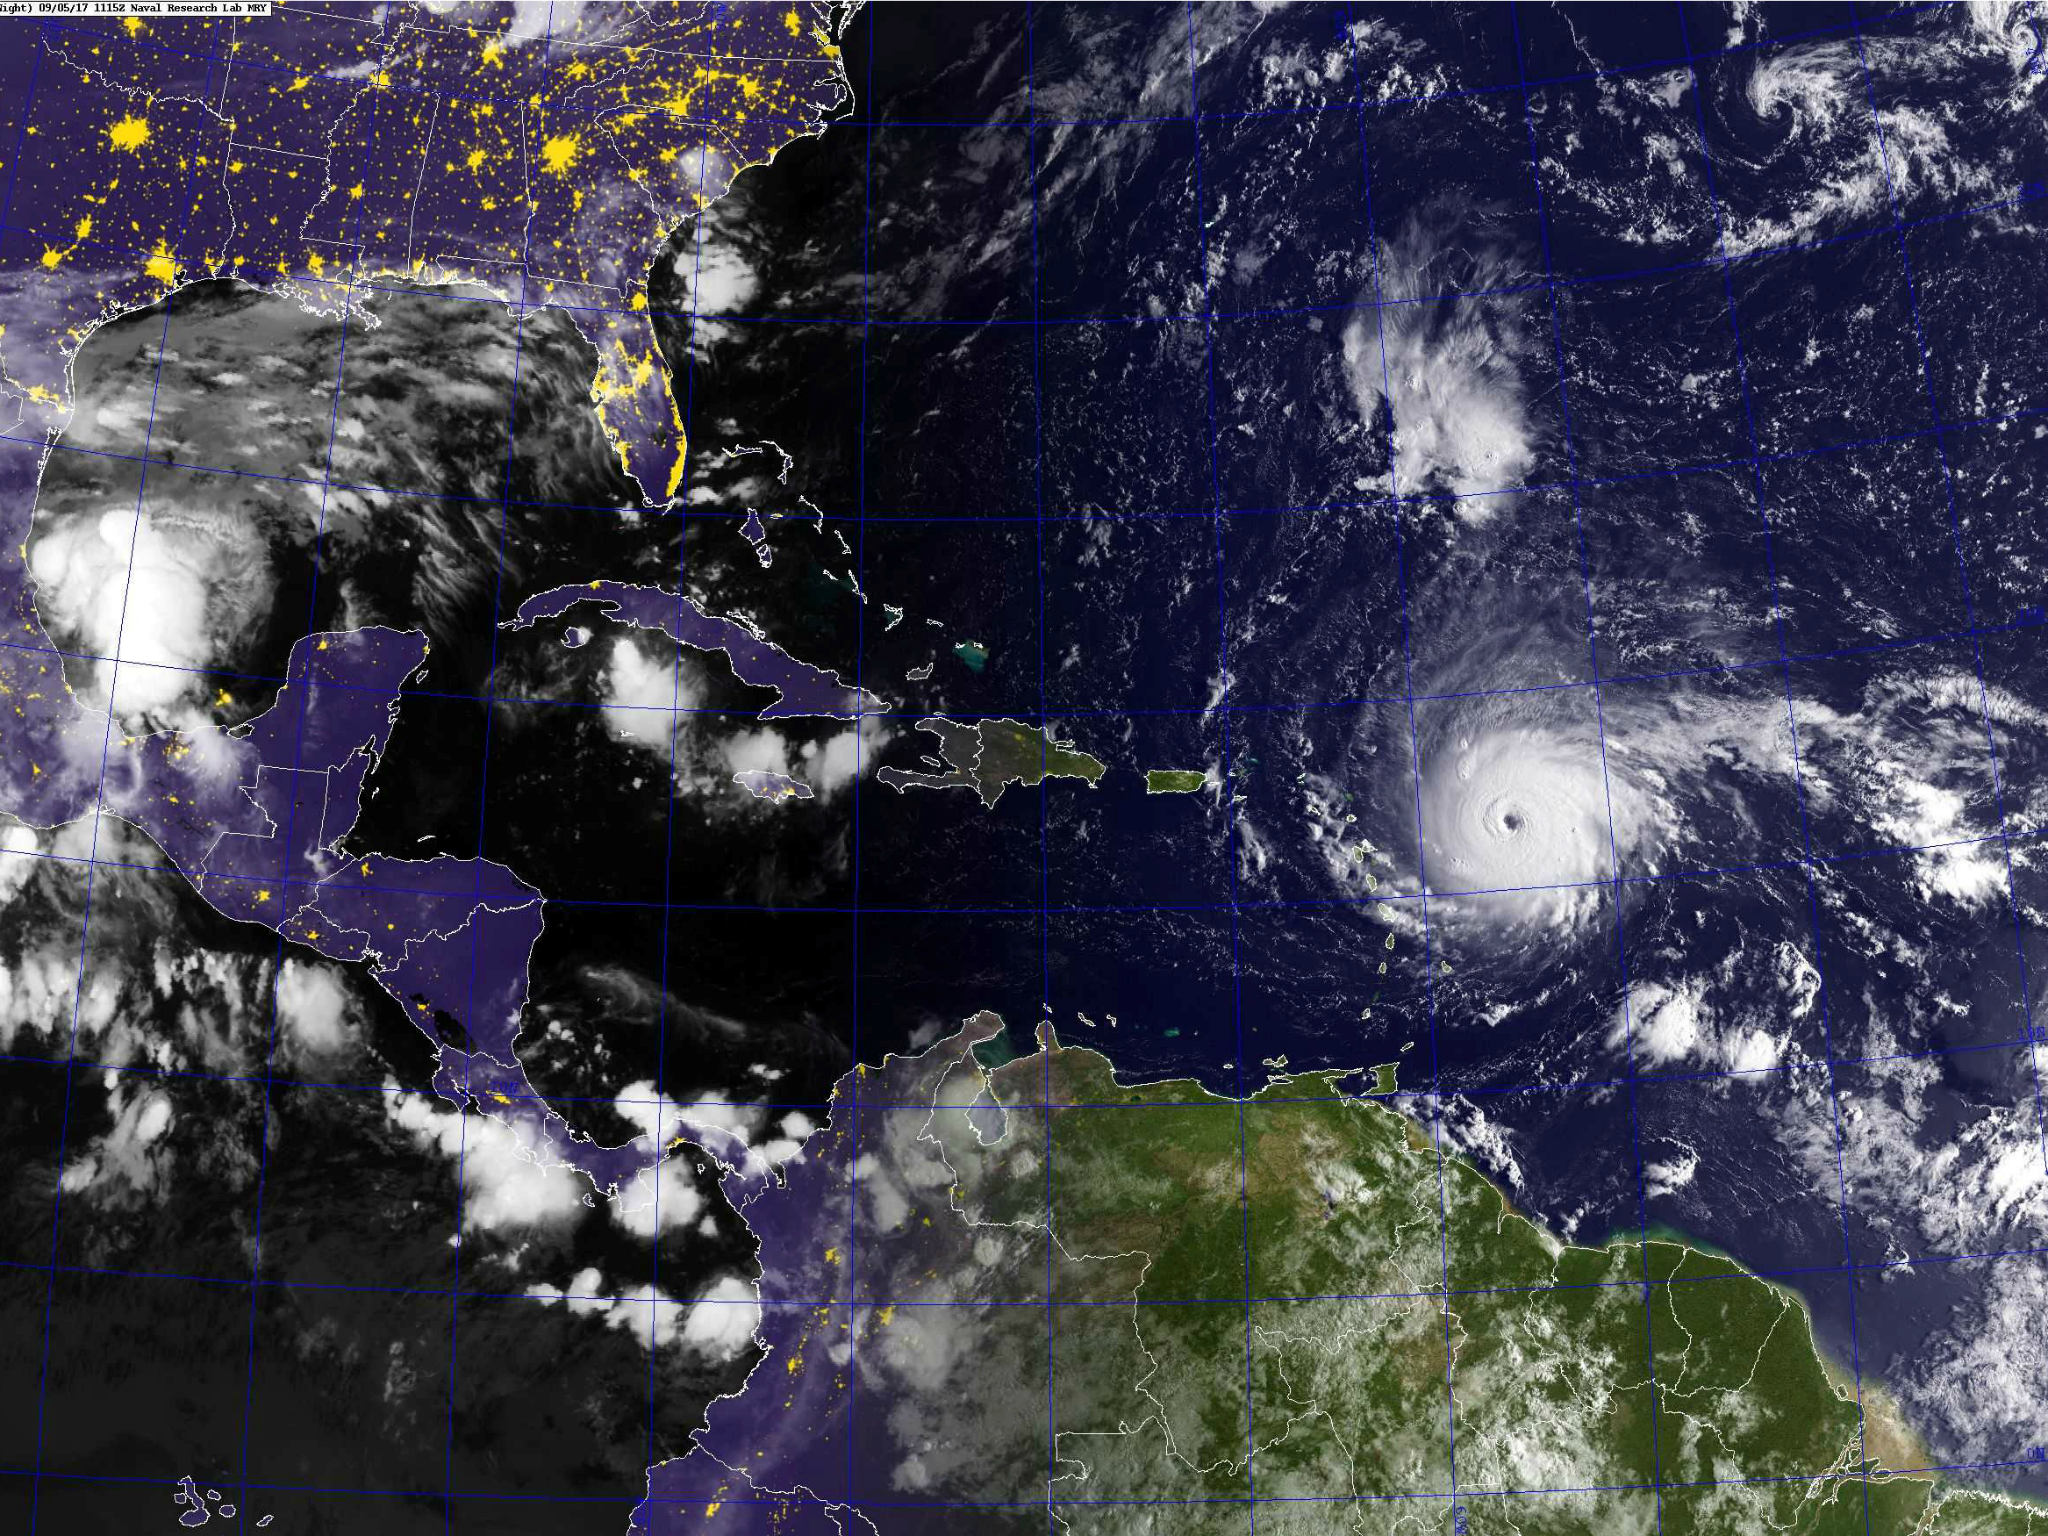 Hurricane Irma, shown here in a satellite image from September 5, 2017, is among the strongest Atlantic storms ever recorded